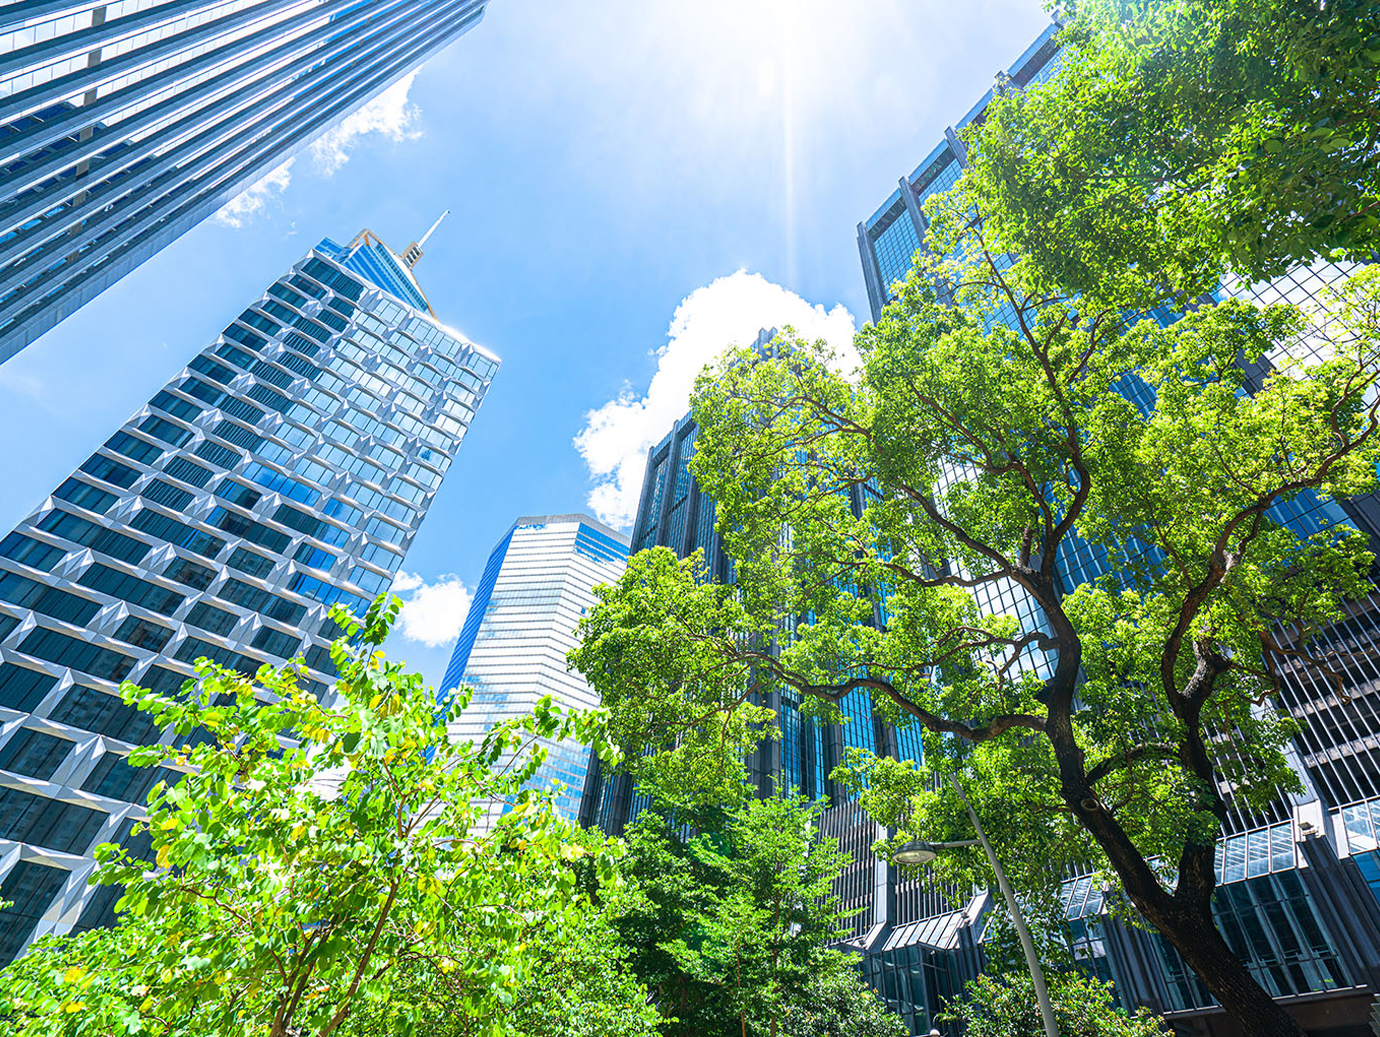 High-rise commercial buildings surrounded by greenery